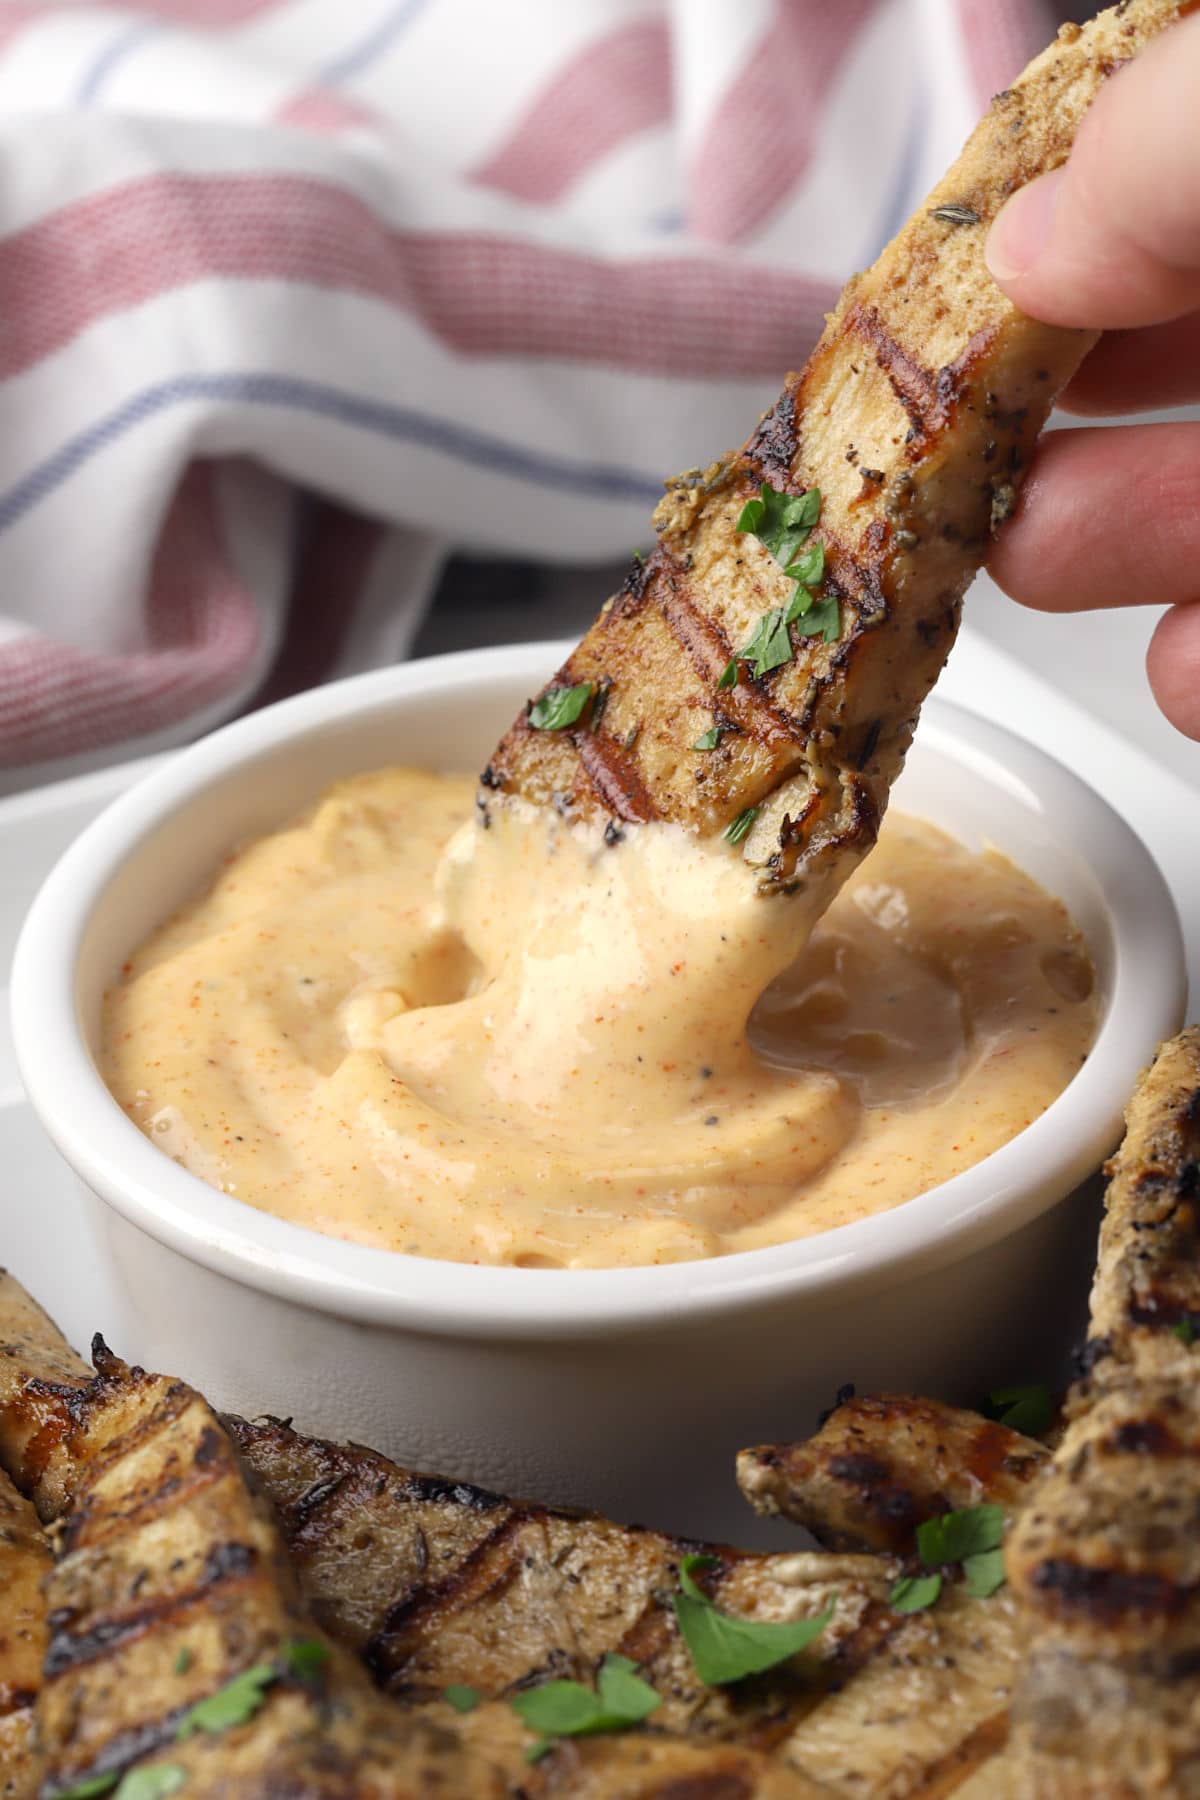 Chicken tender being dipped into a bowl of spicy aioli.